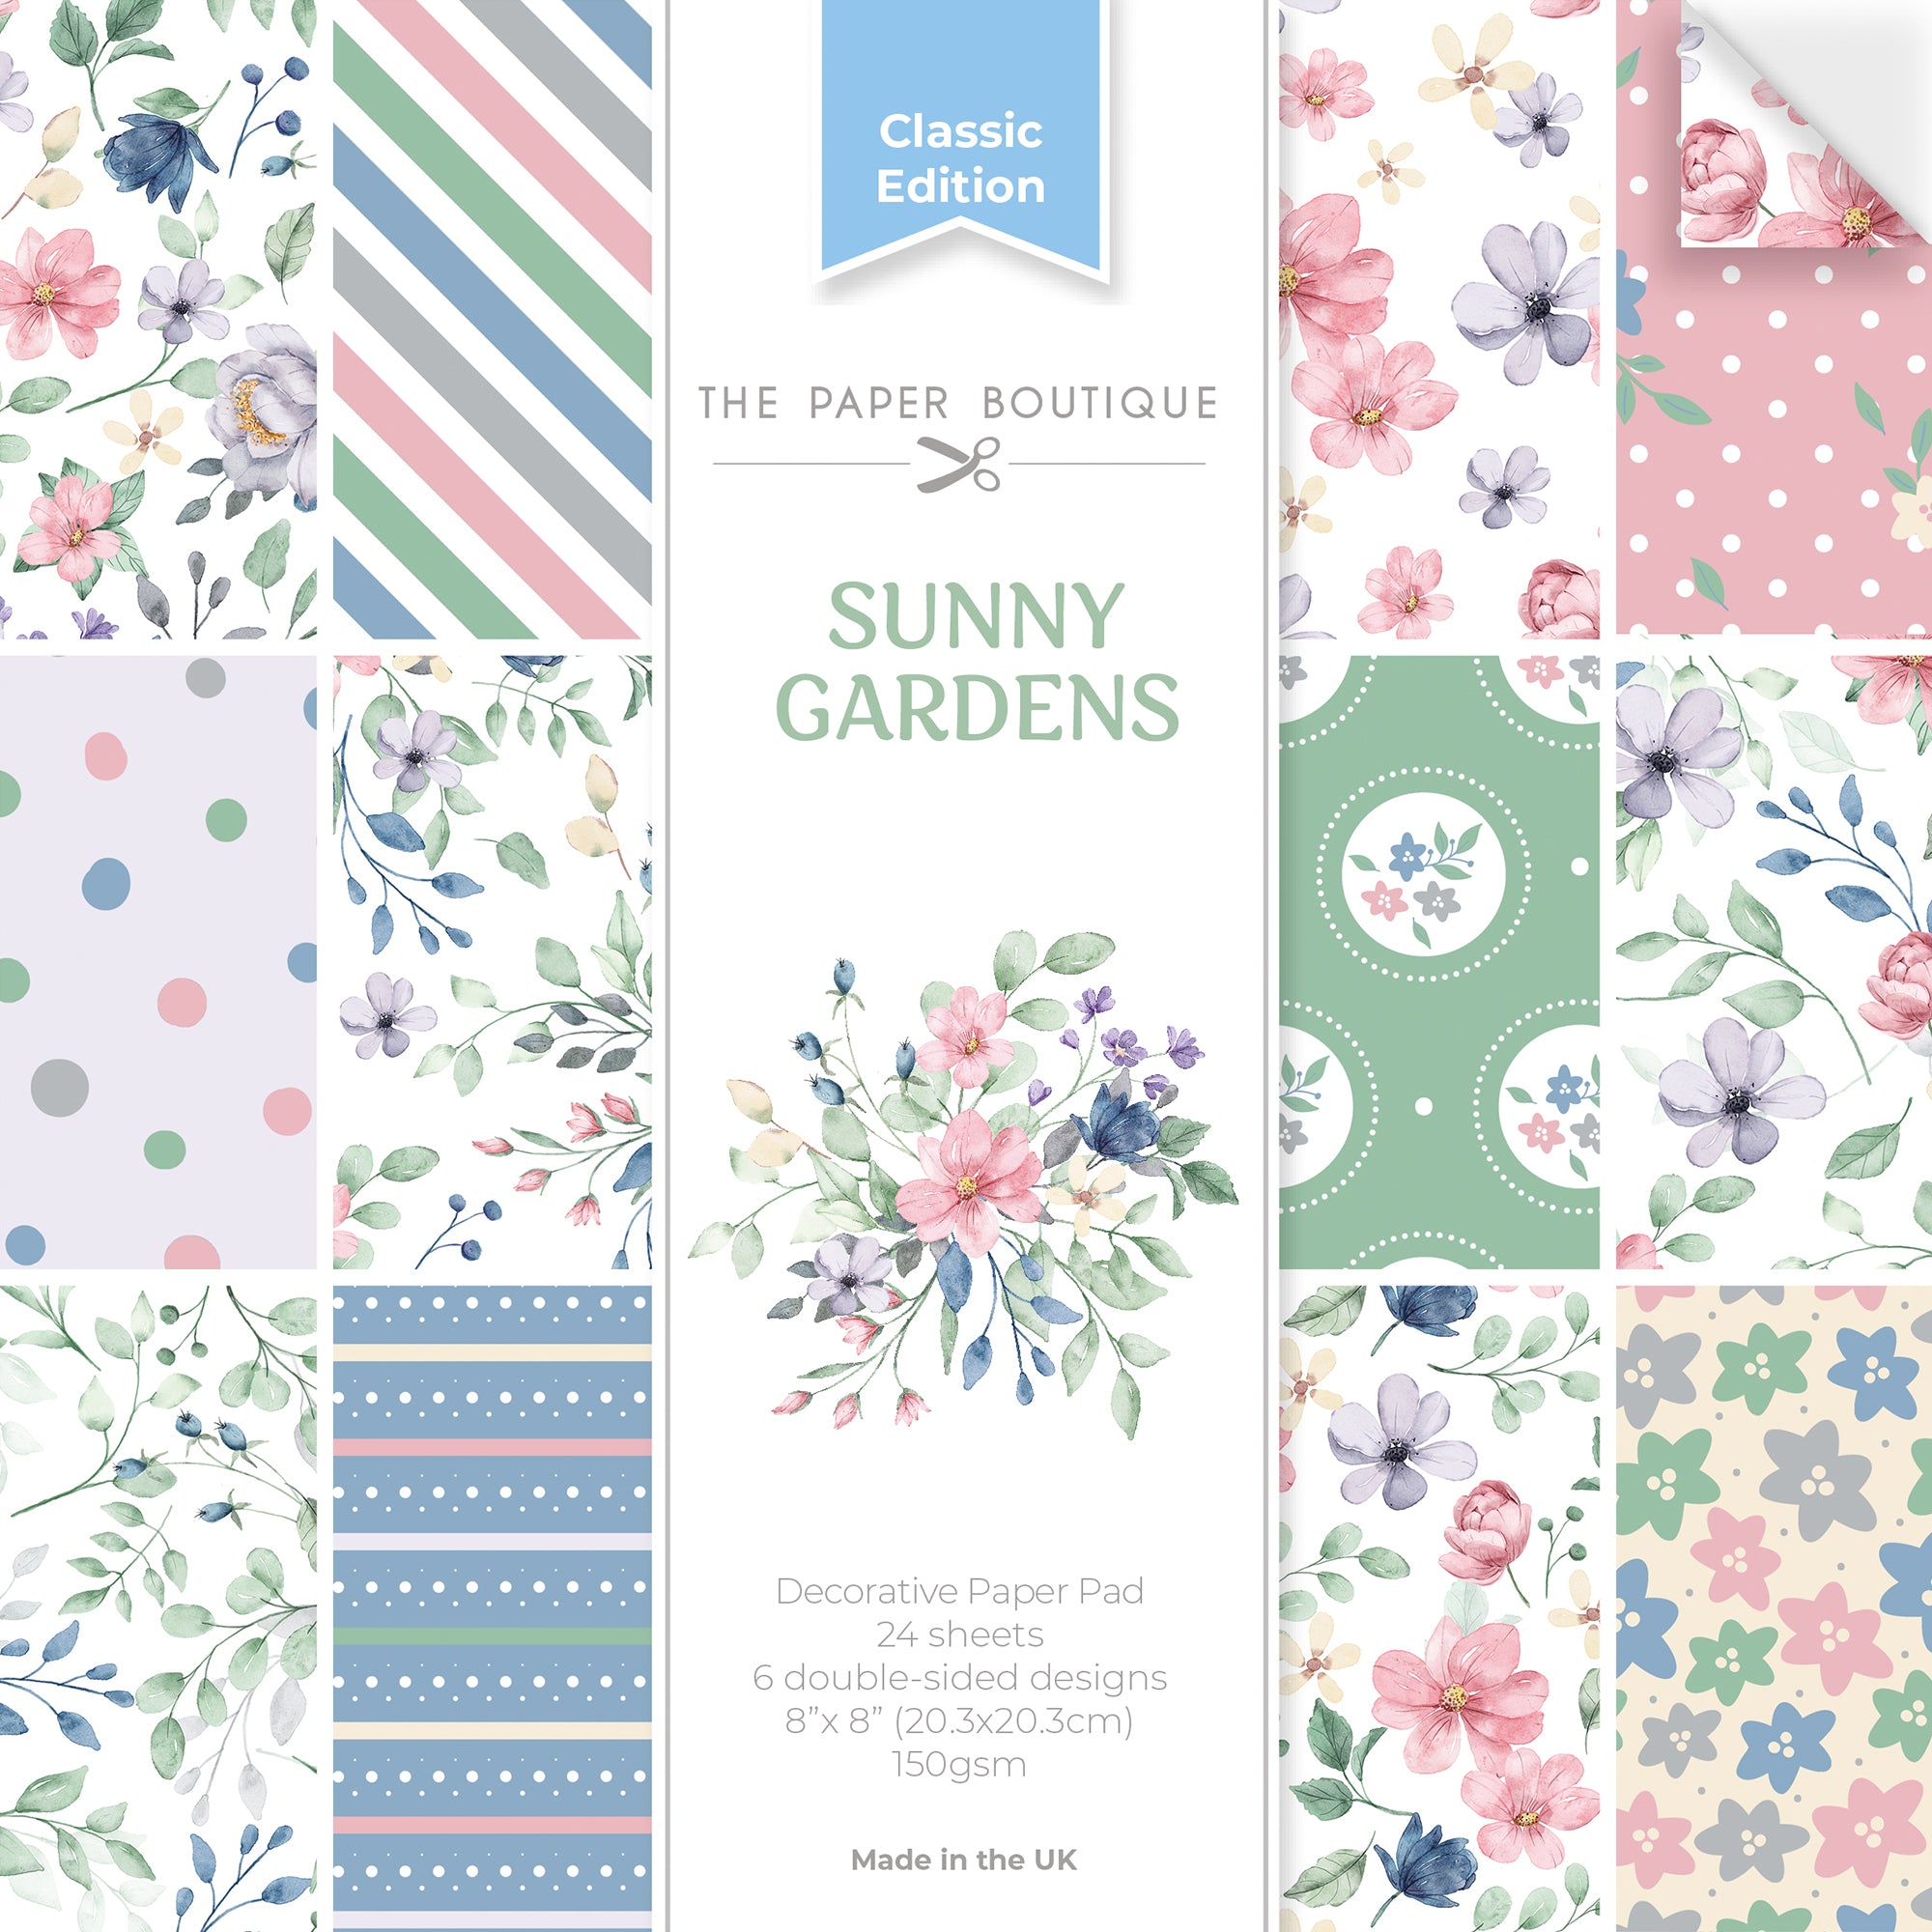 The Paper Boutique Sunny Gardens 8 in x 8 in Decorative Paper Pad